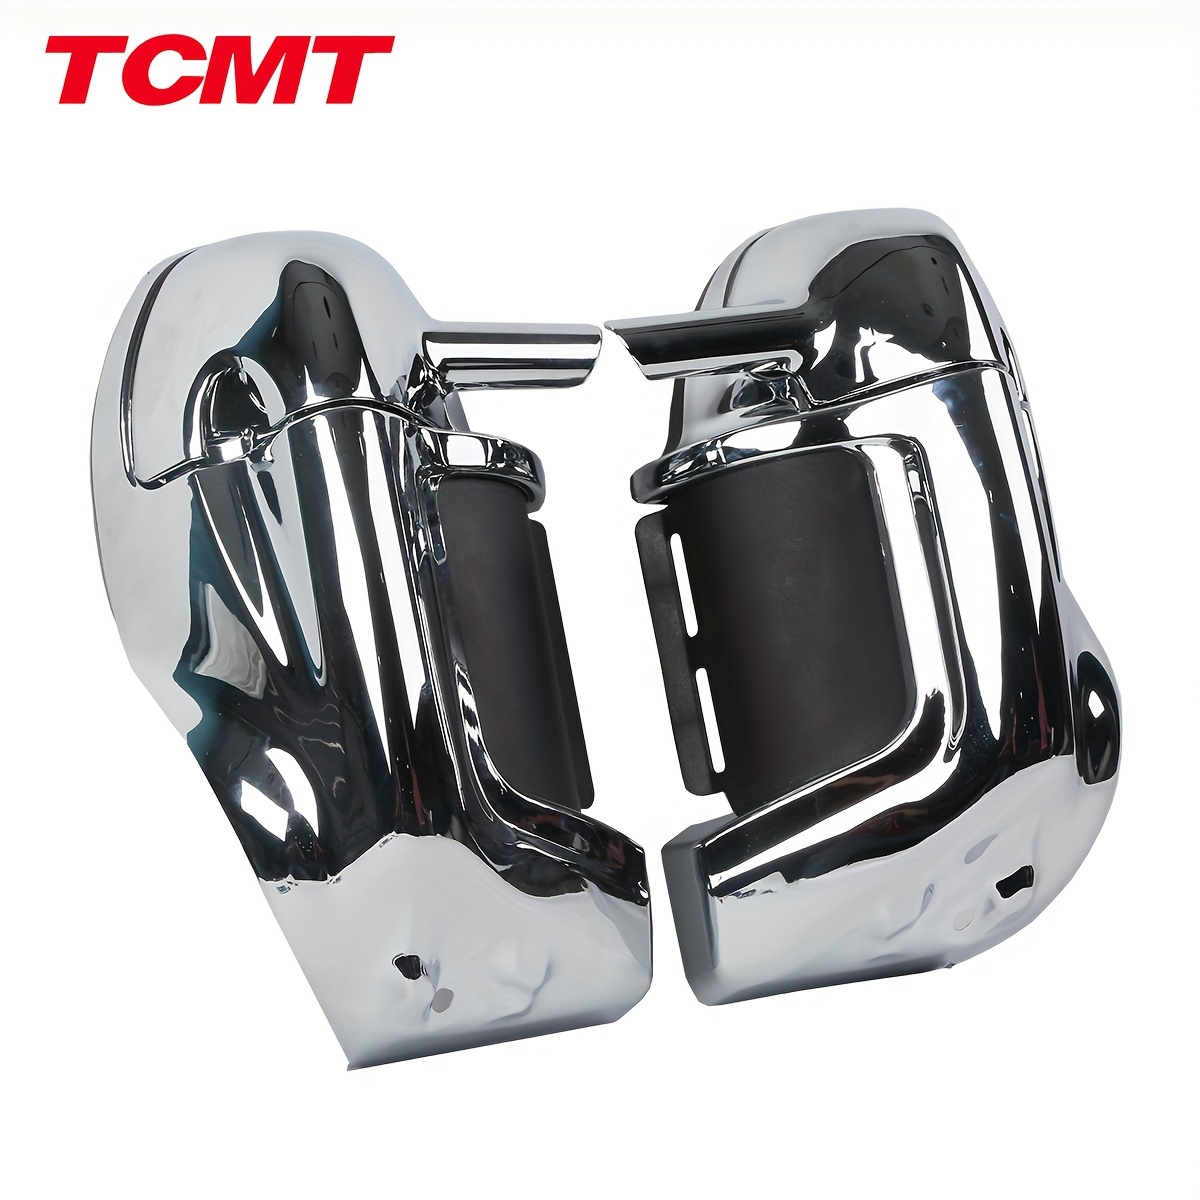 

Tcmt Lower Vented Leg Fairing Glove Box Fit For Harley Touring Street Electra Glide Ultra Classic Road King 1983-2013